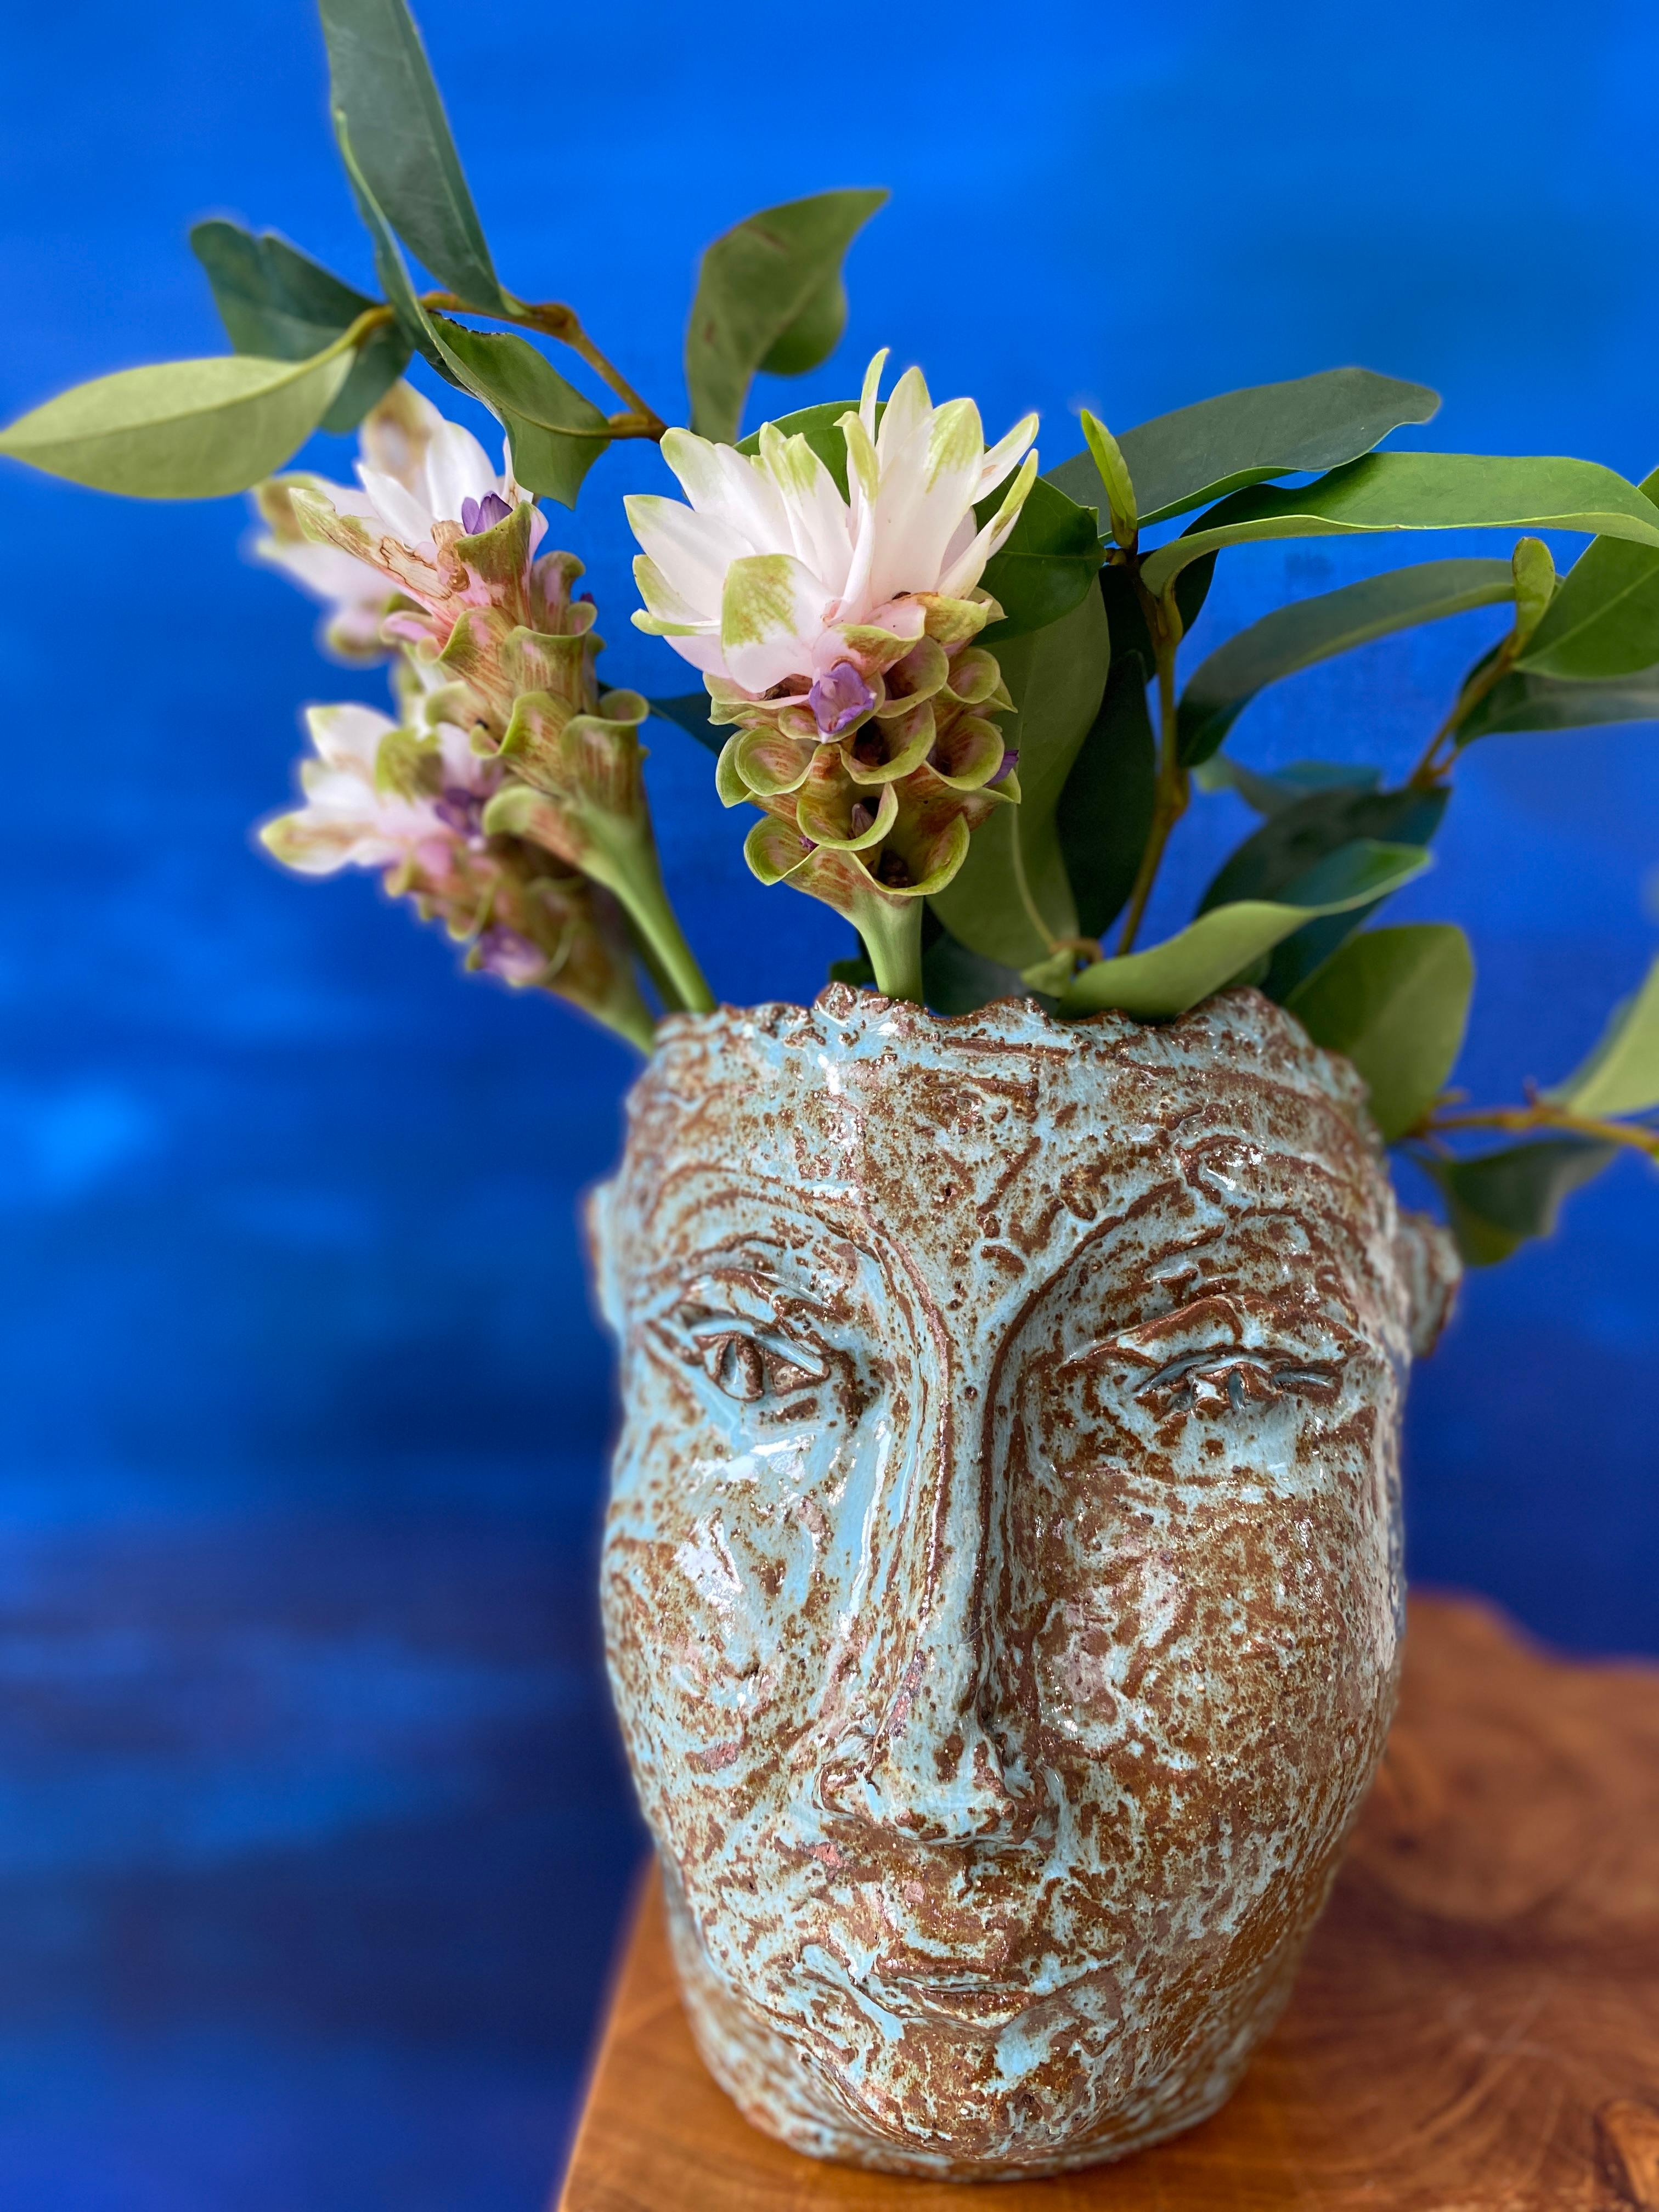 Turquoise sienna rustic wabi sabi hand sculpted glazed clay face vessel ancient  - Contemporary Sculpture by Kathleen Rhee